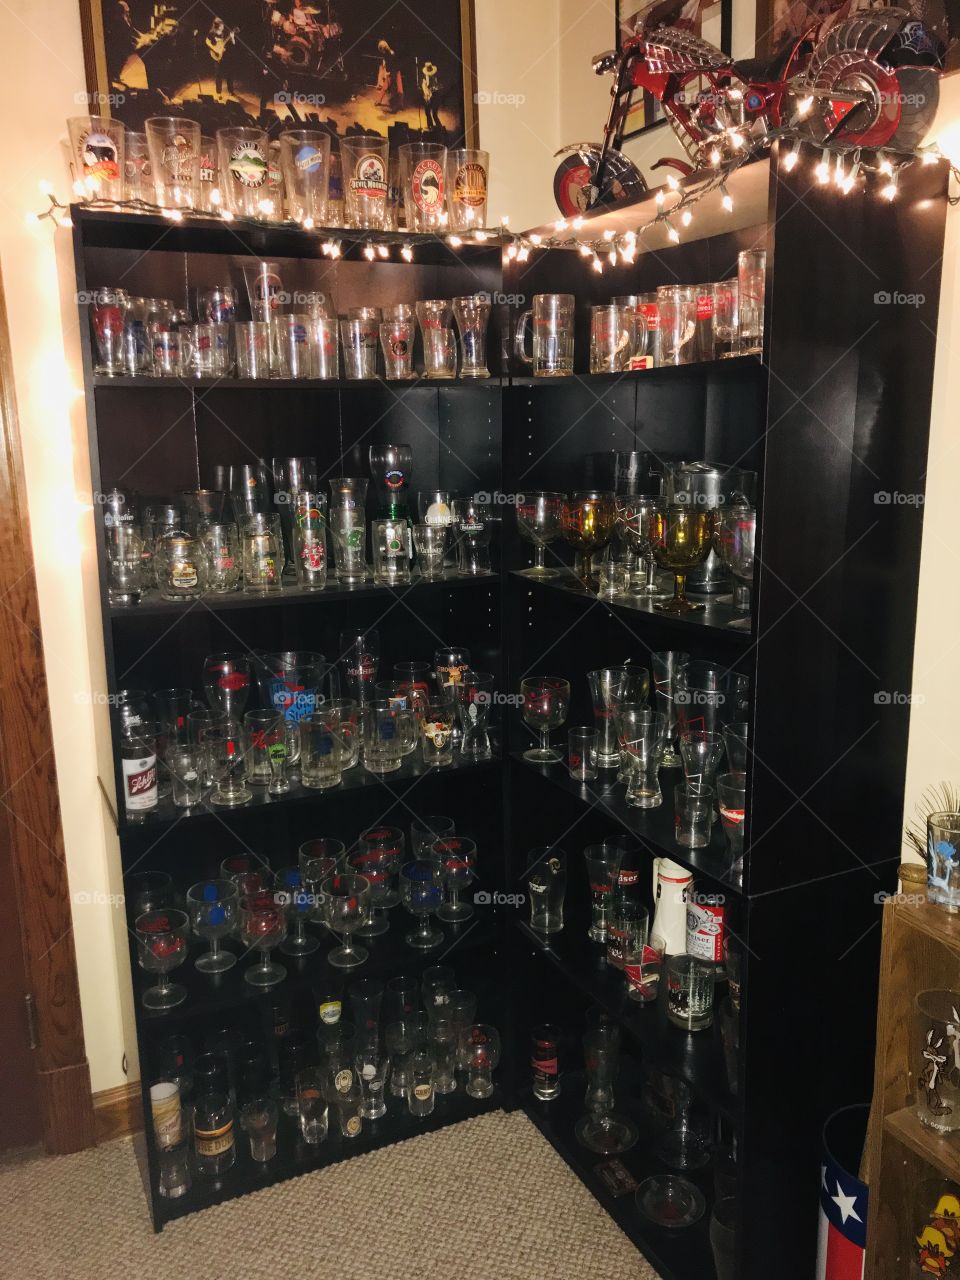 Beer glass collection